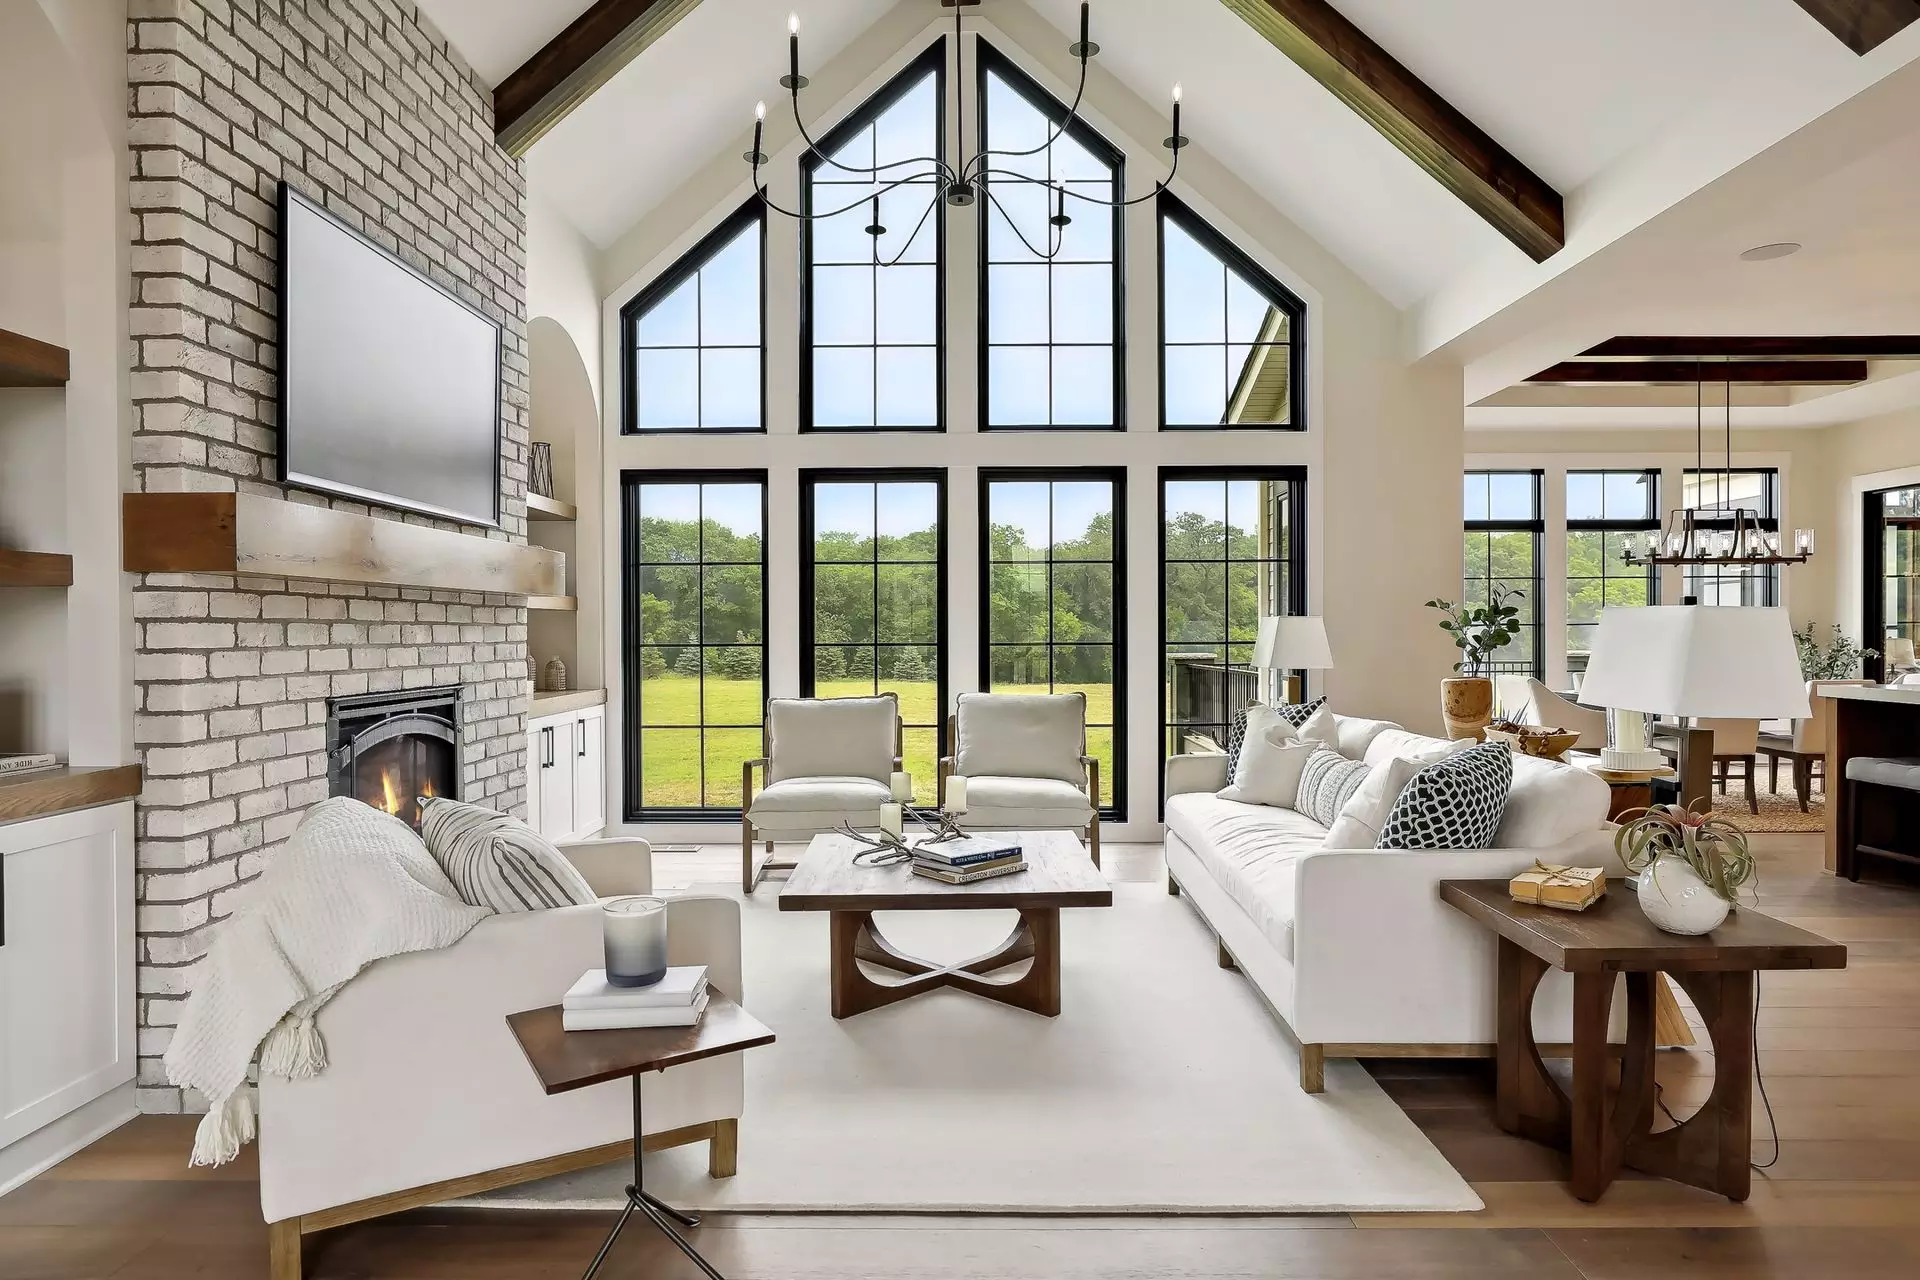 Floor to peak windows in vaulted great room to take in the view